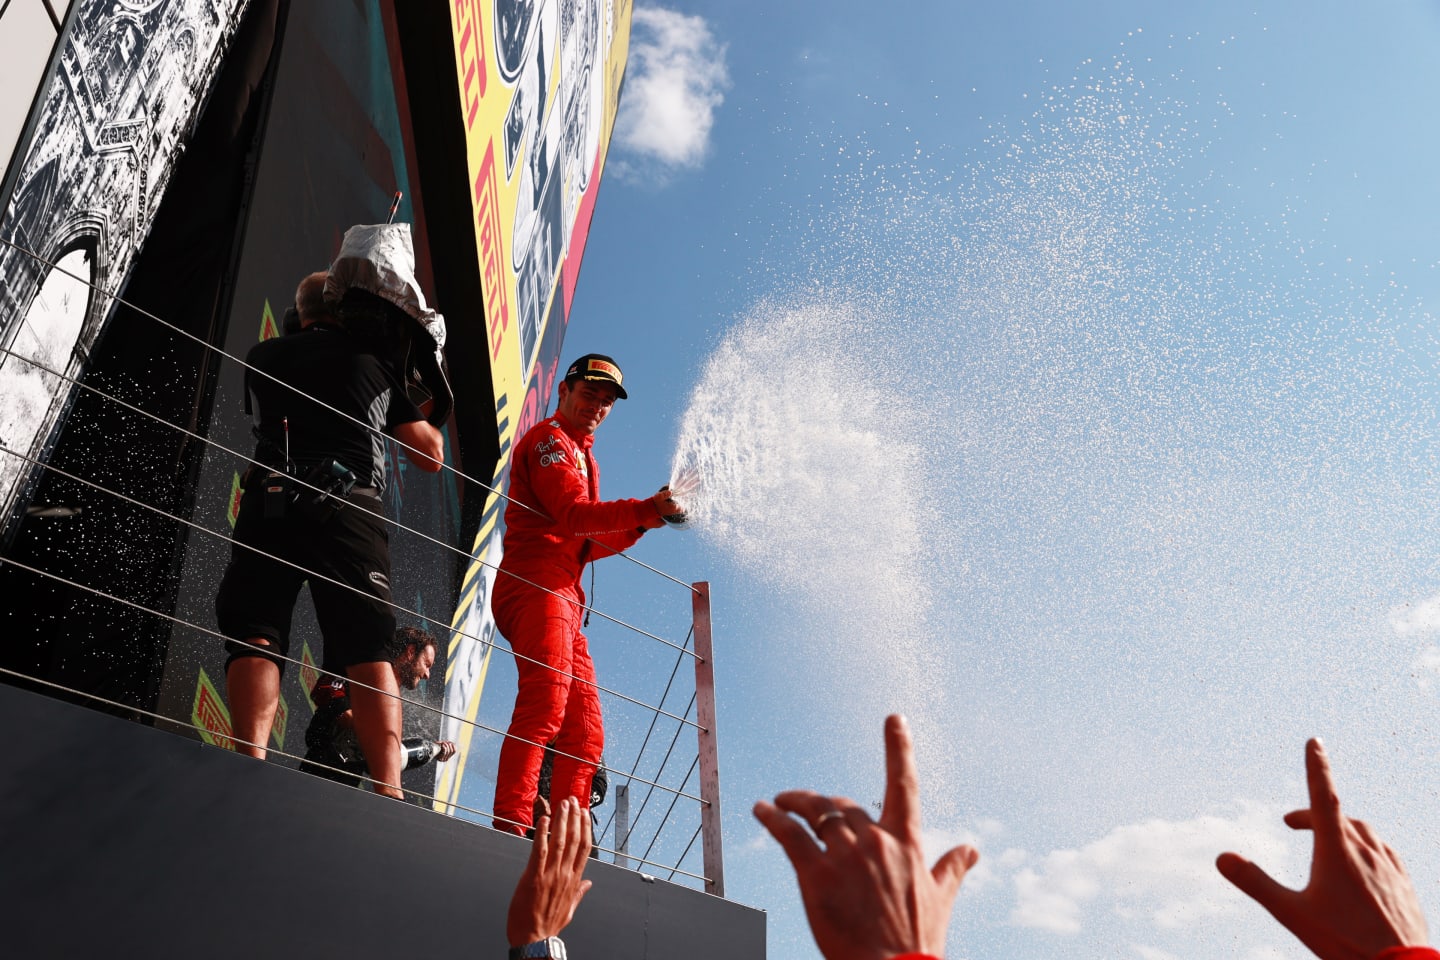 NORTHAMPTON, ENGLAND - JULY 18: Second placed Charles Leclerc of Monaco and Ferrari celebrates on the podium  during the F1 Grand Prix of Great Britain at Silverstone on July 18, 2021 in Northampton, England. (Photo by Mark Thompson/Getty Images)